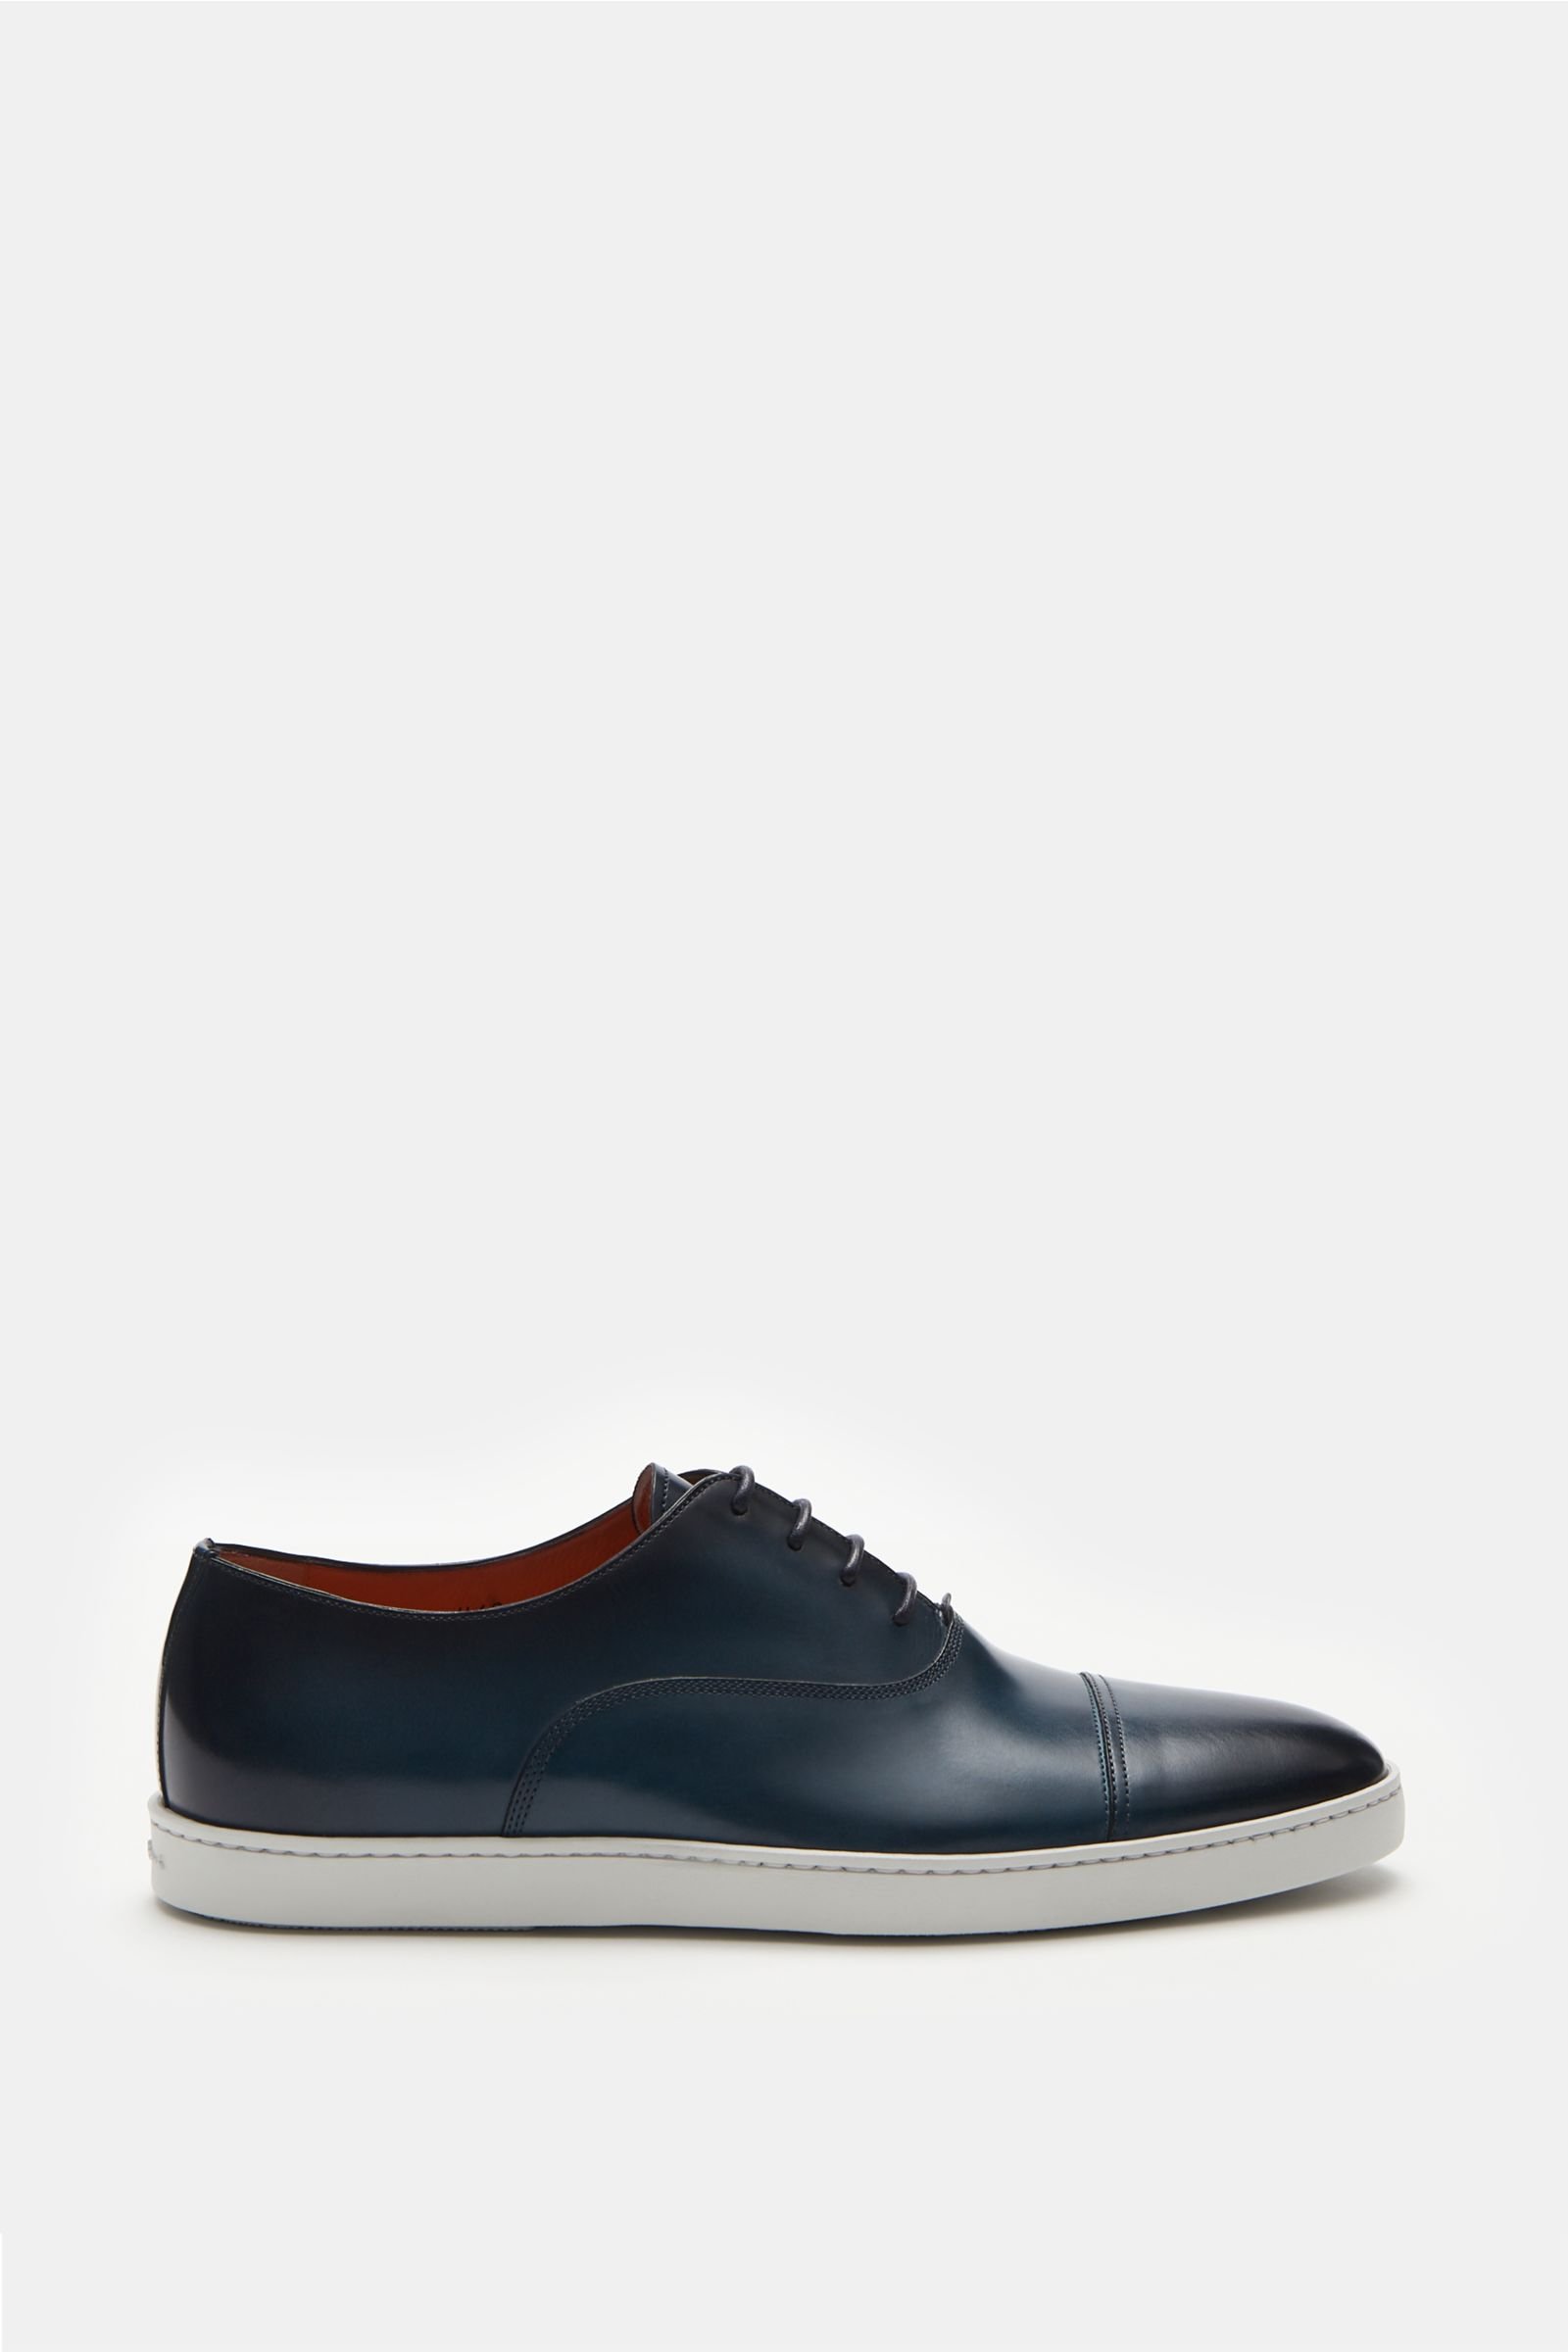 Oxford shoes teal